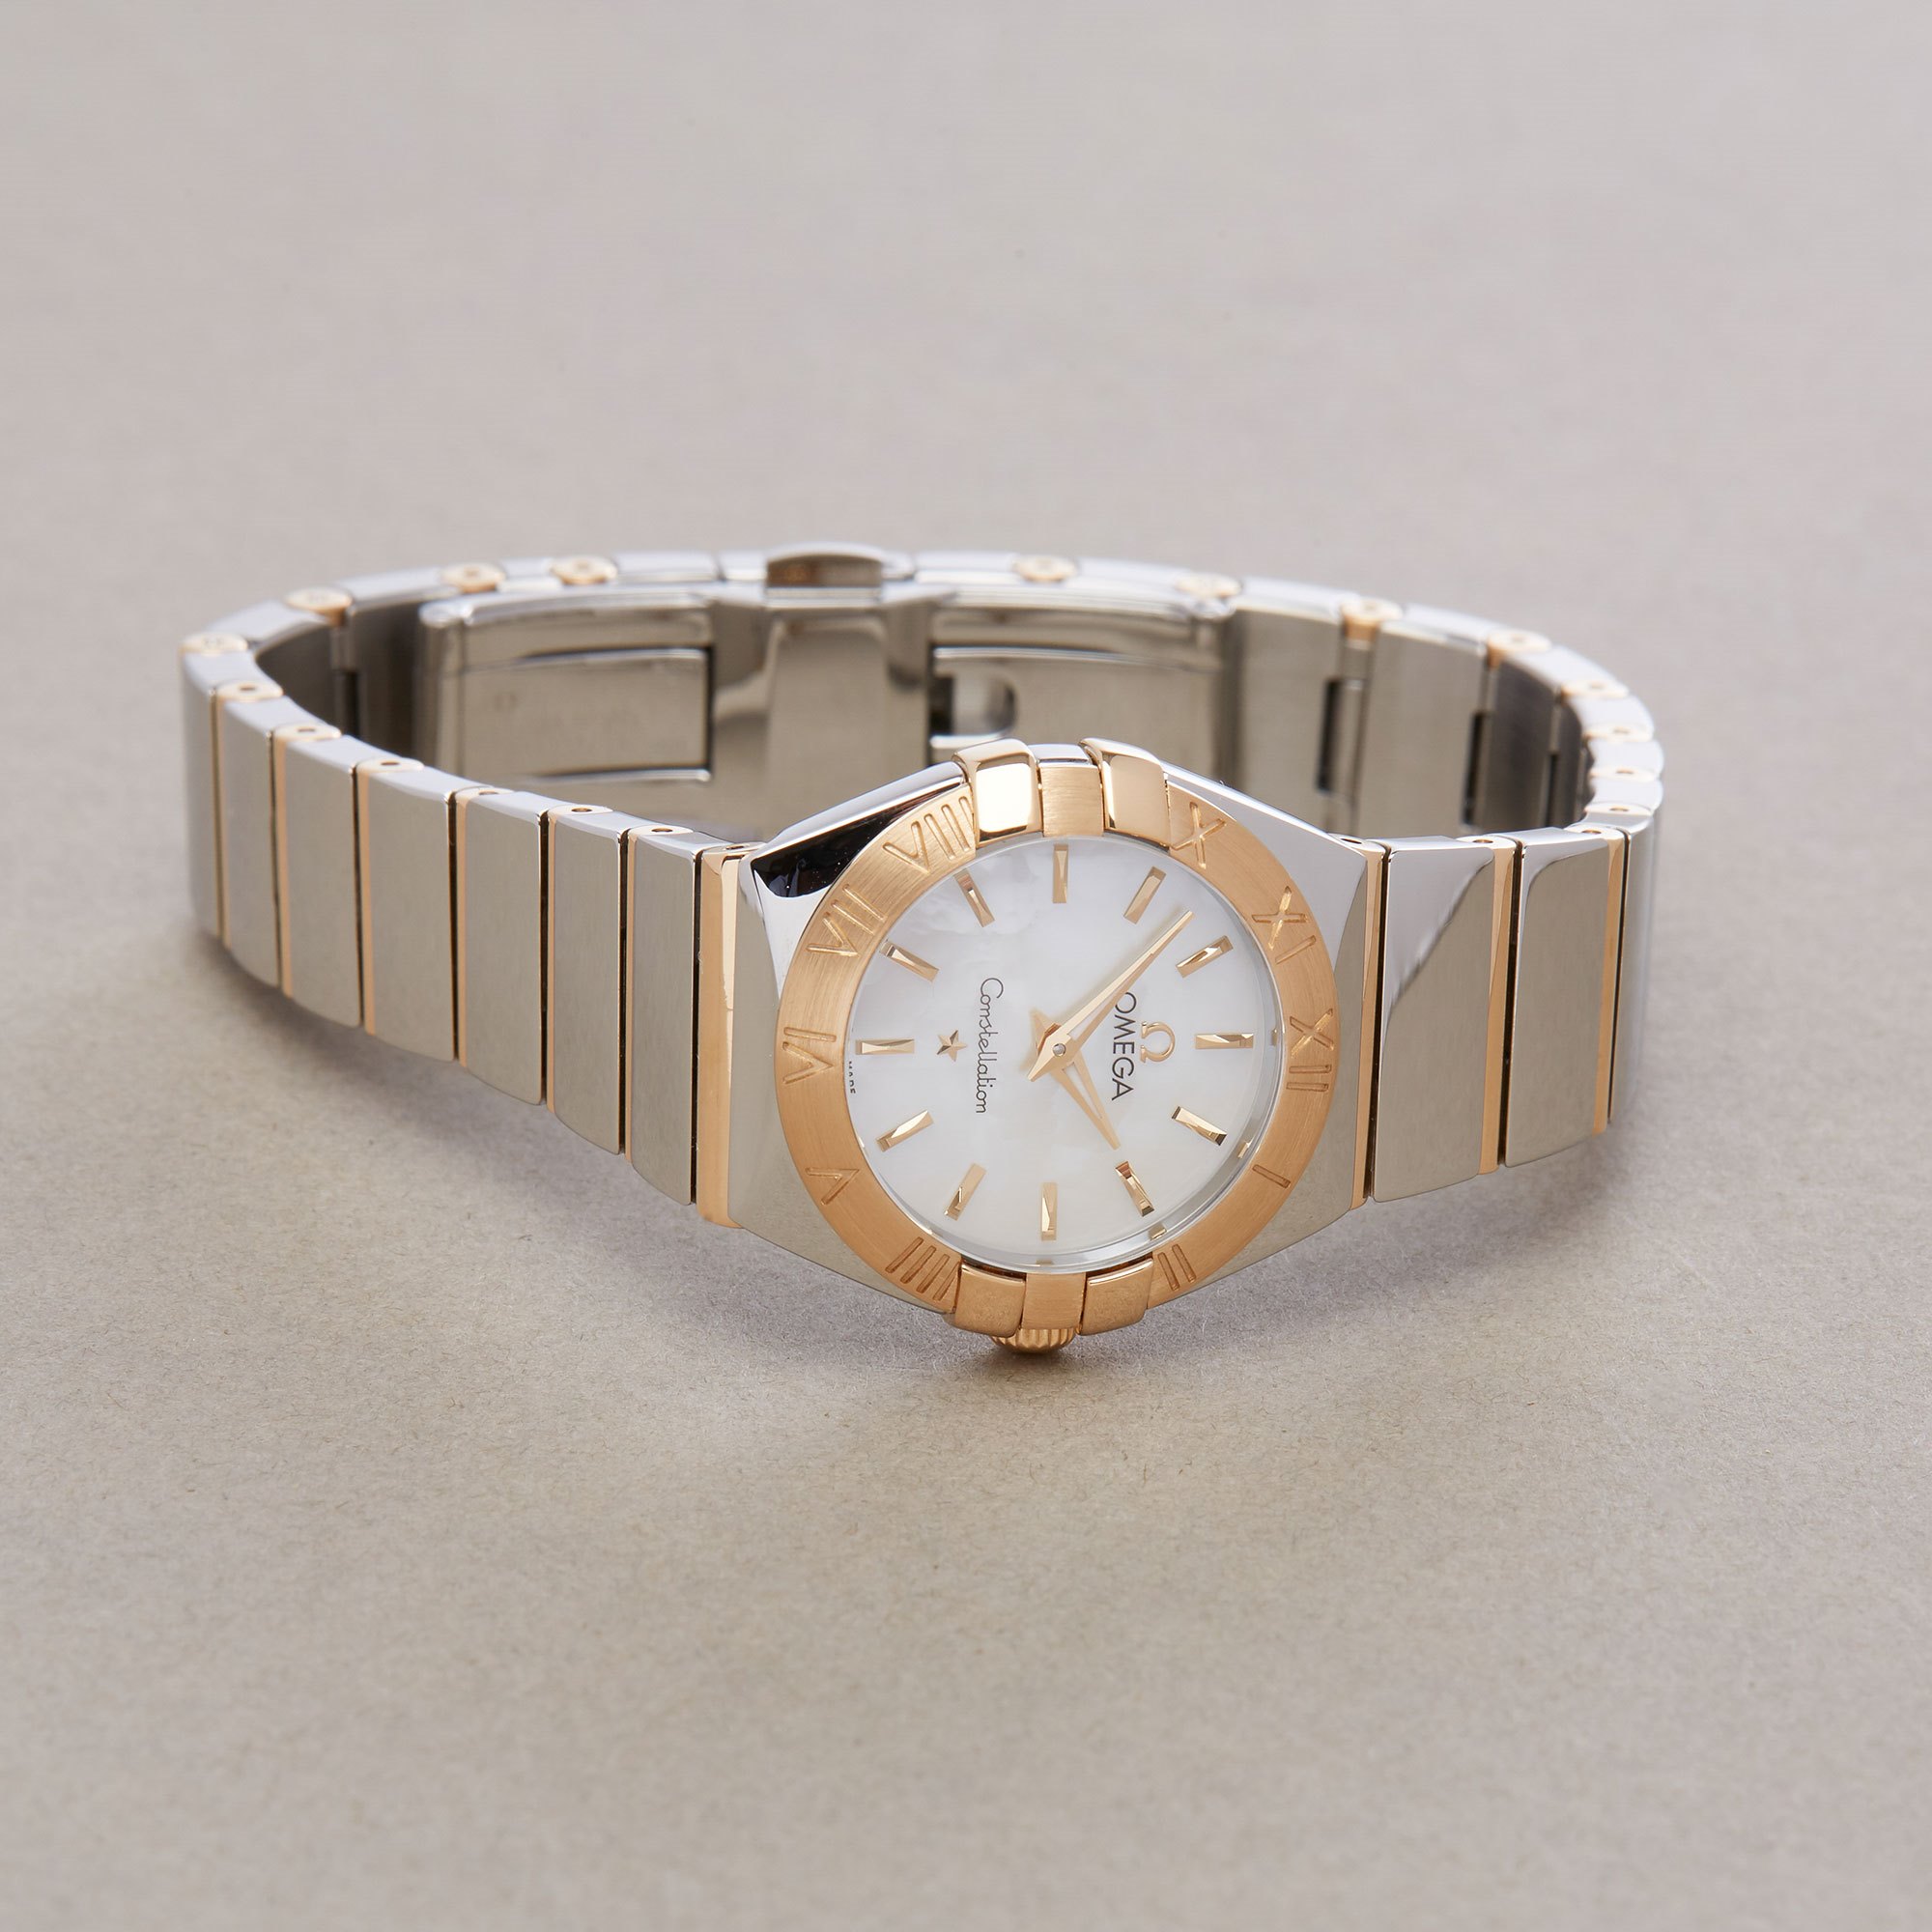 Omega Constellation 18K Yellow Gold & Stainless Steel Watch 123.20.24.60.05.002 - Image 4 of 12